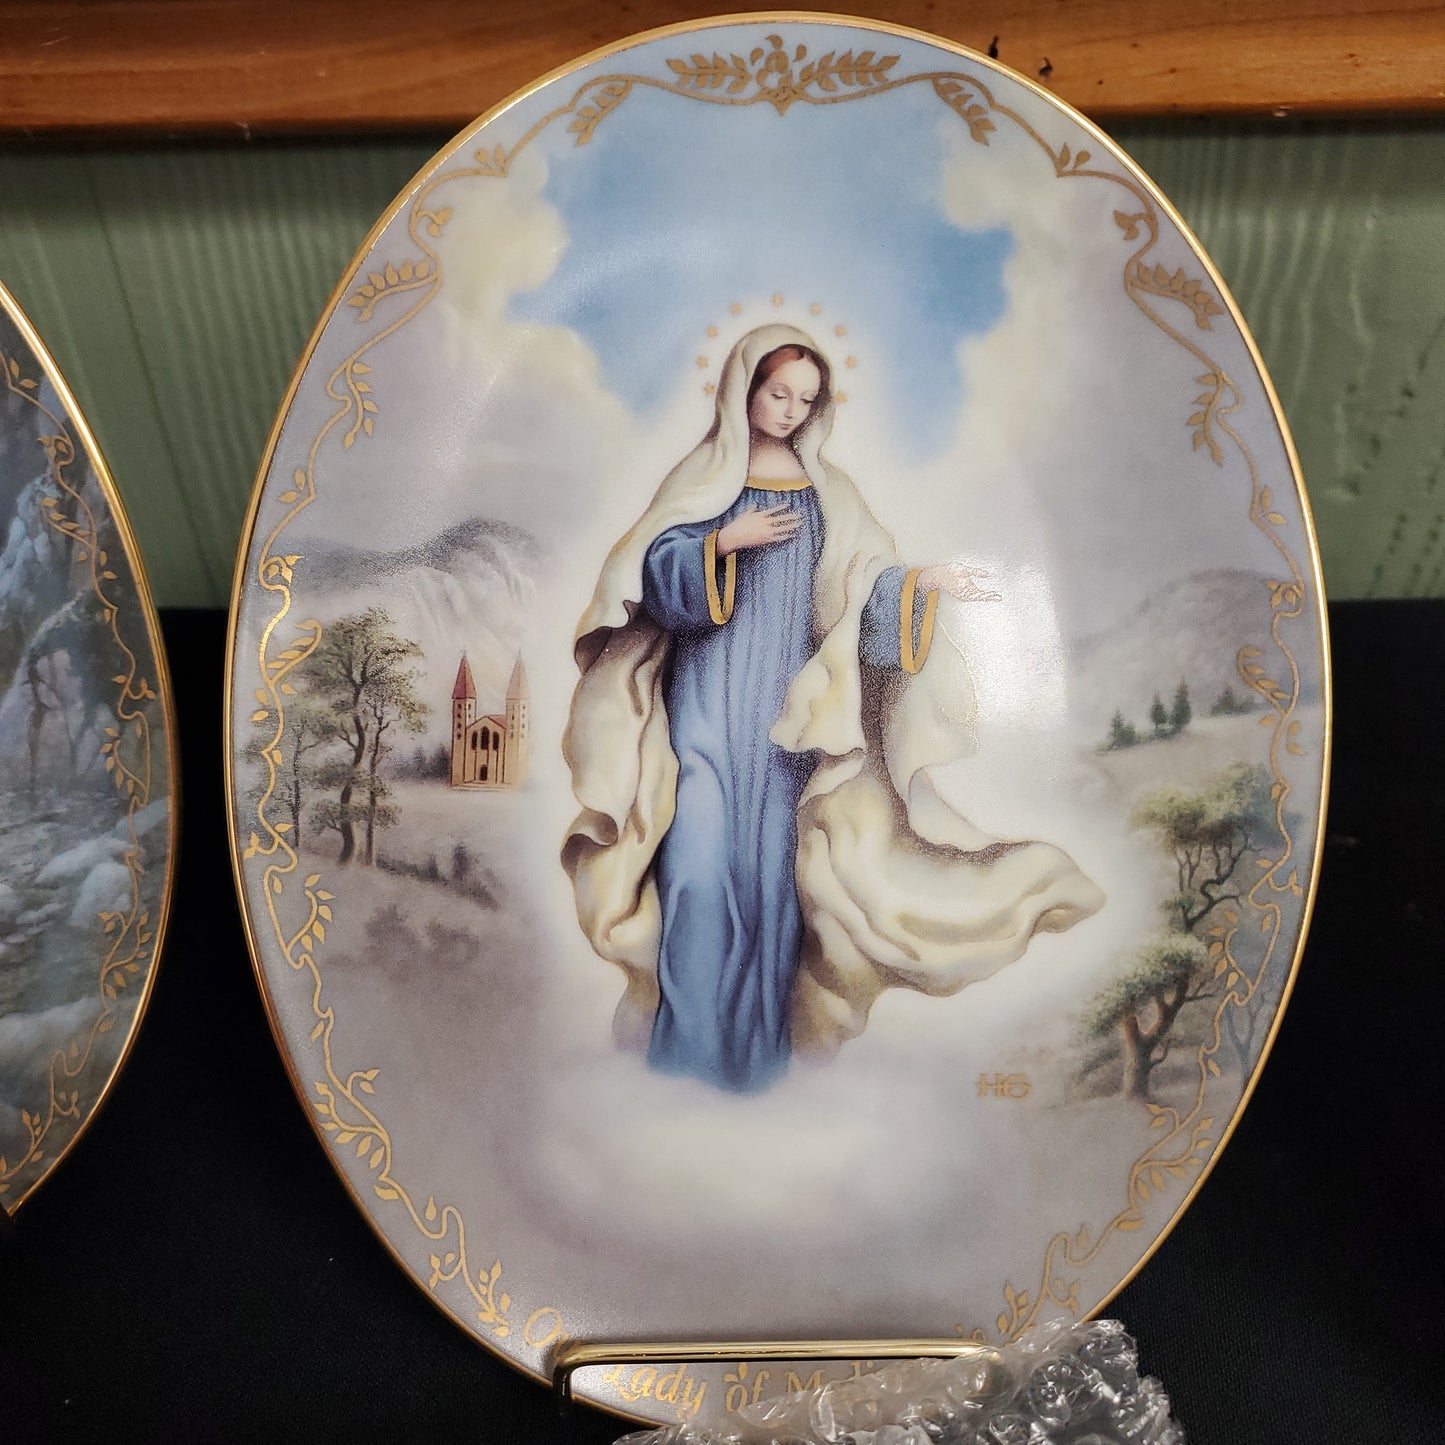 Visions of Our Lady Plates